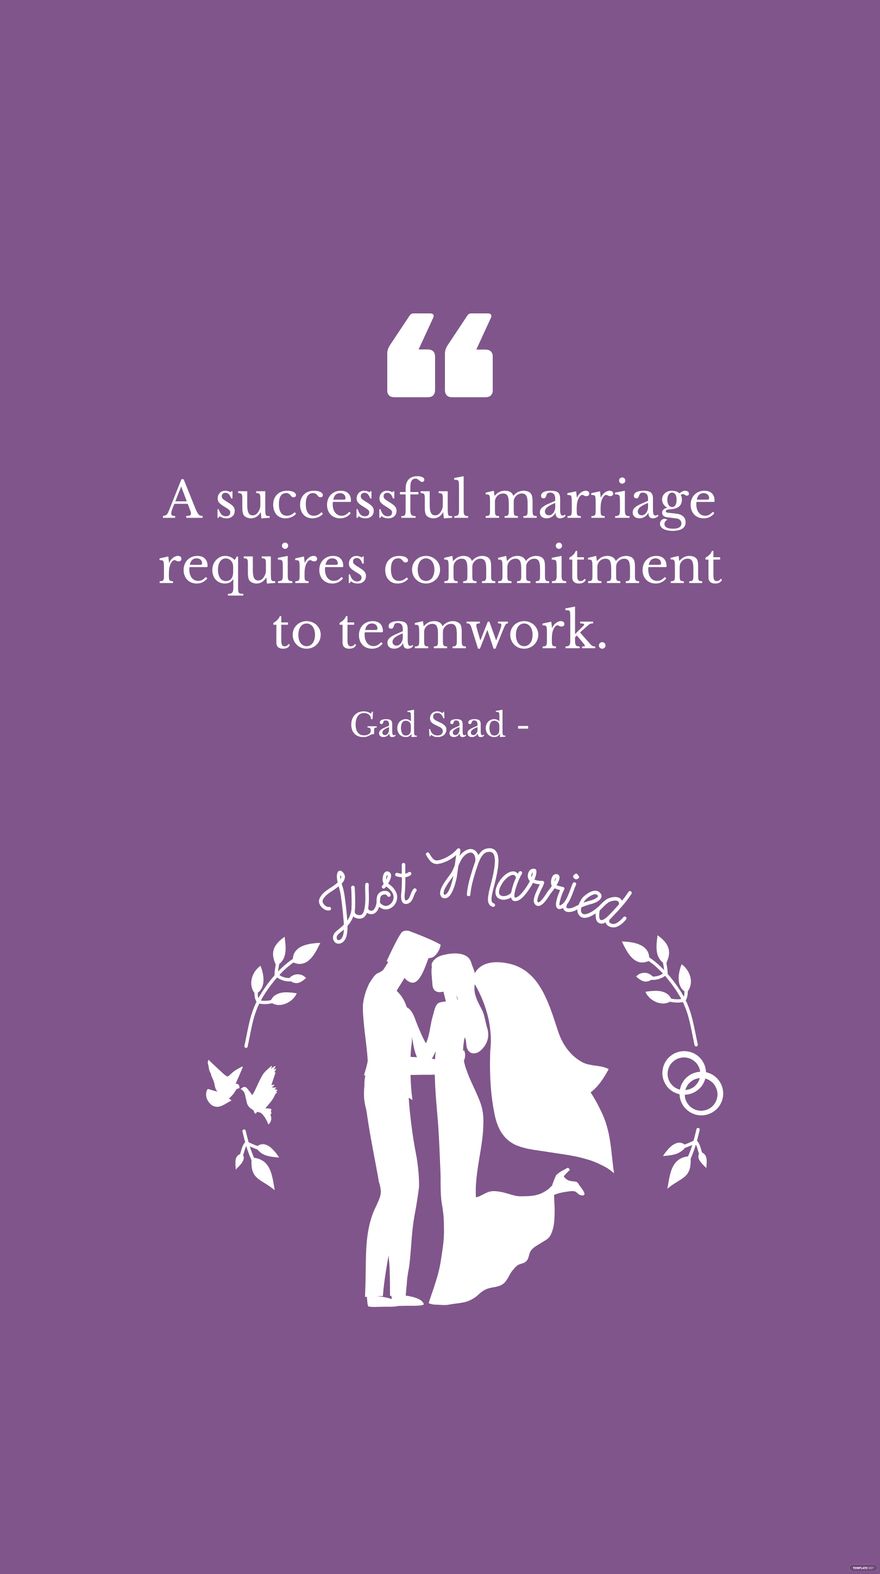 Gad Saad - A successful marriage requires commitment to teamwork.